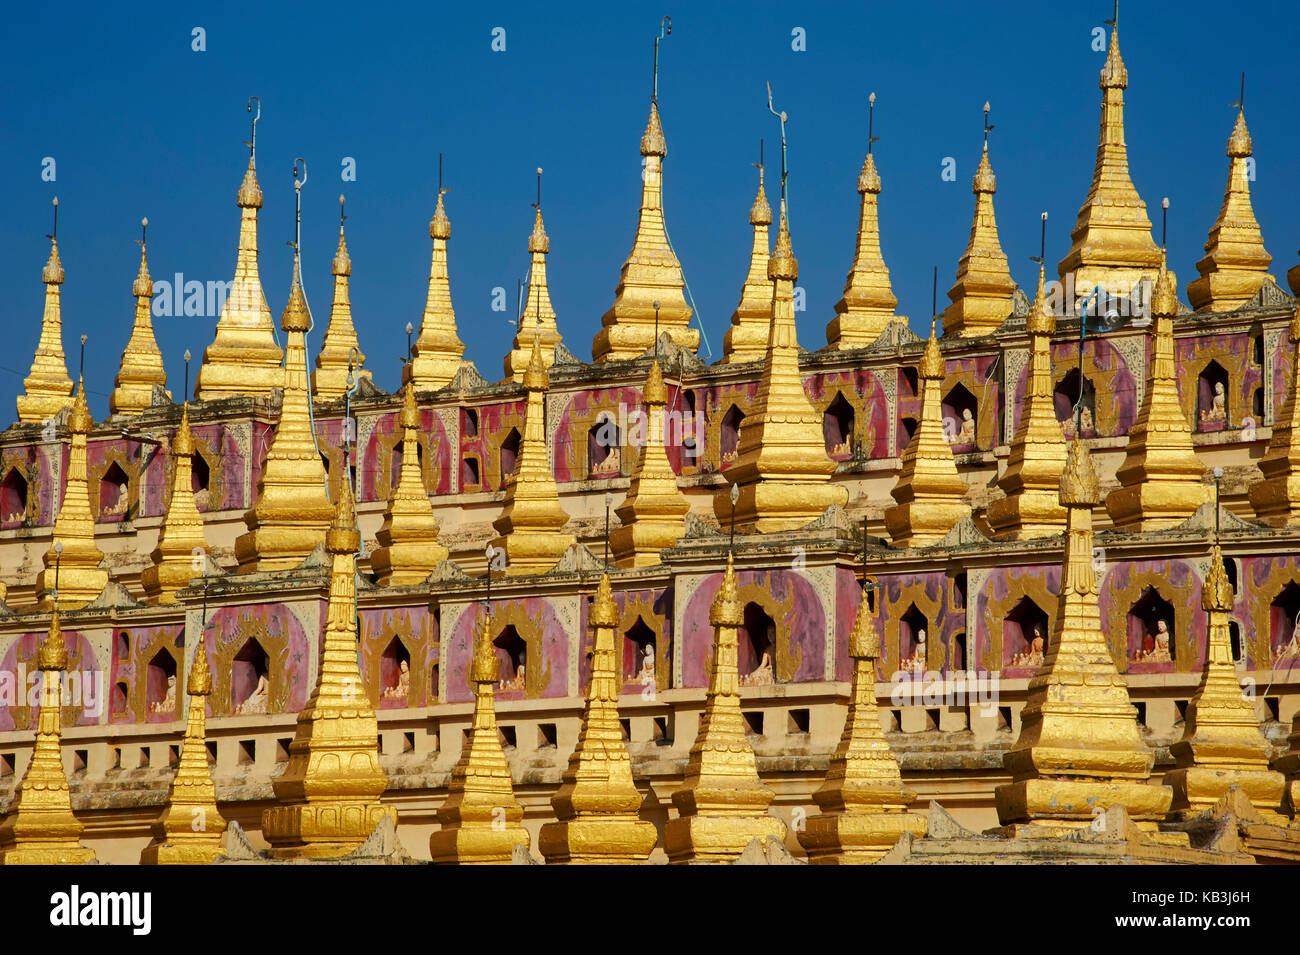 Temple thanboddhay, Monywa, Myanmar, l'Asie, Banque D'Images